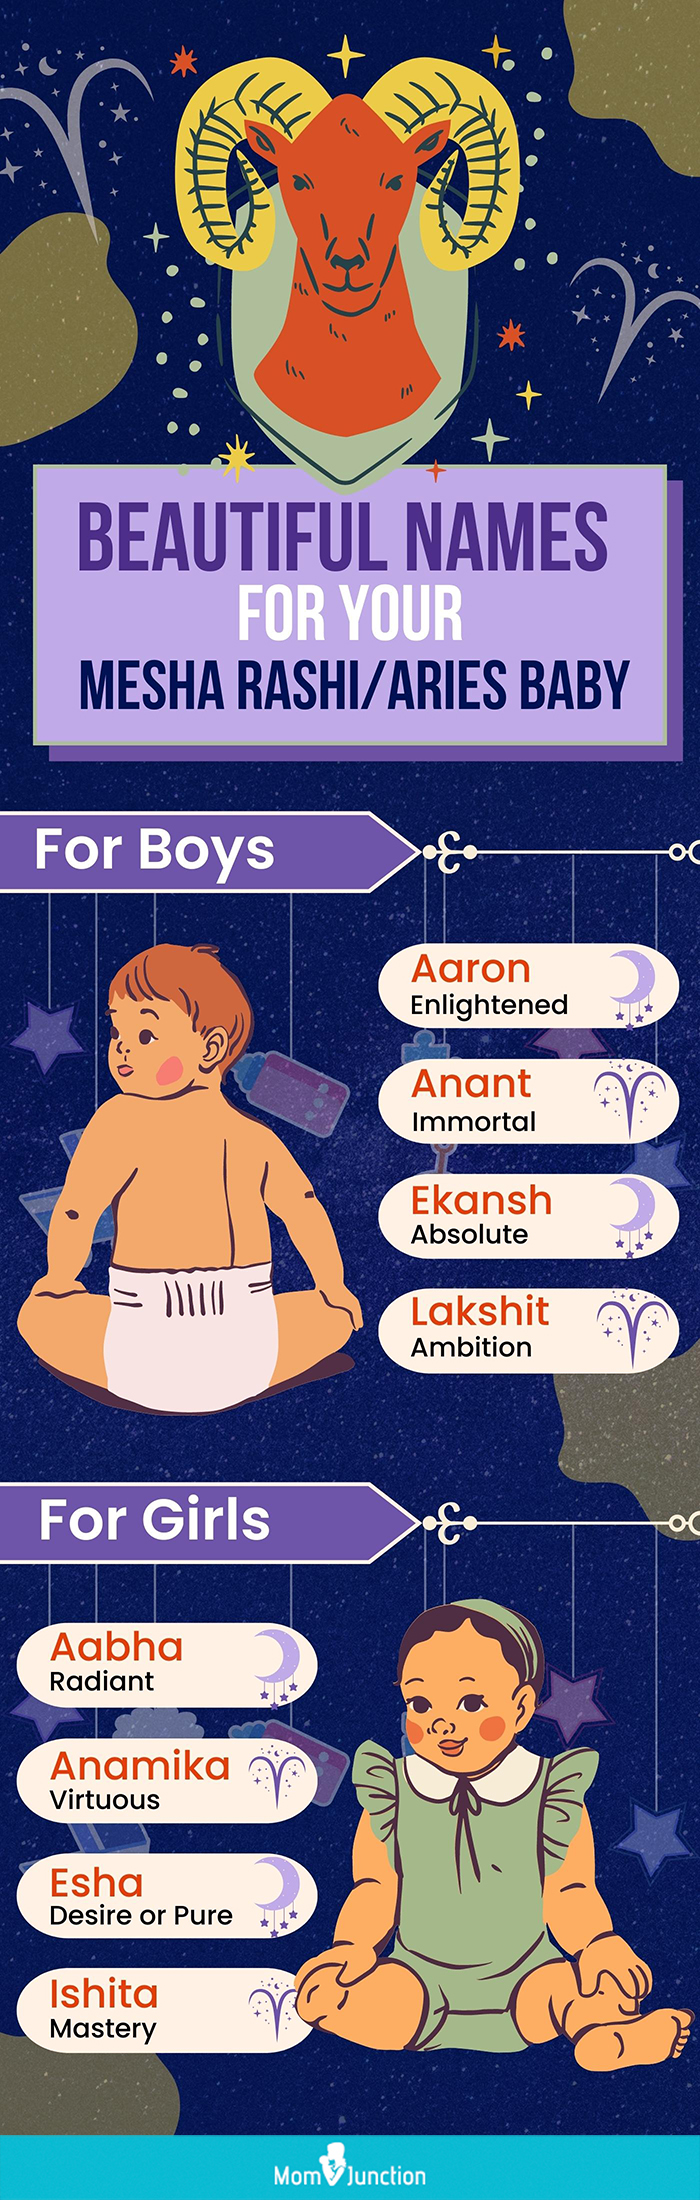 beautiful names for your rashi aries baby (infographic)